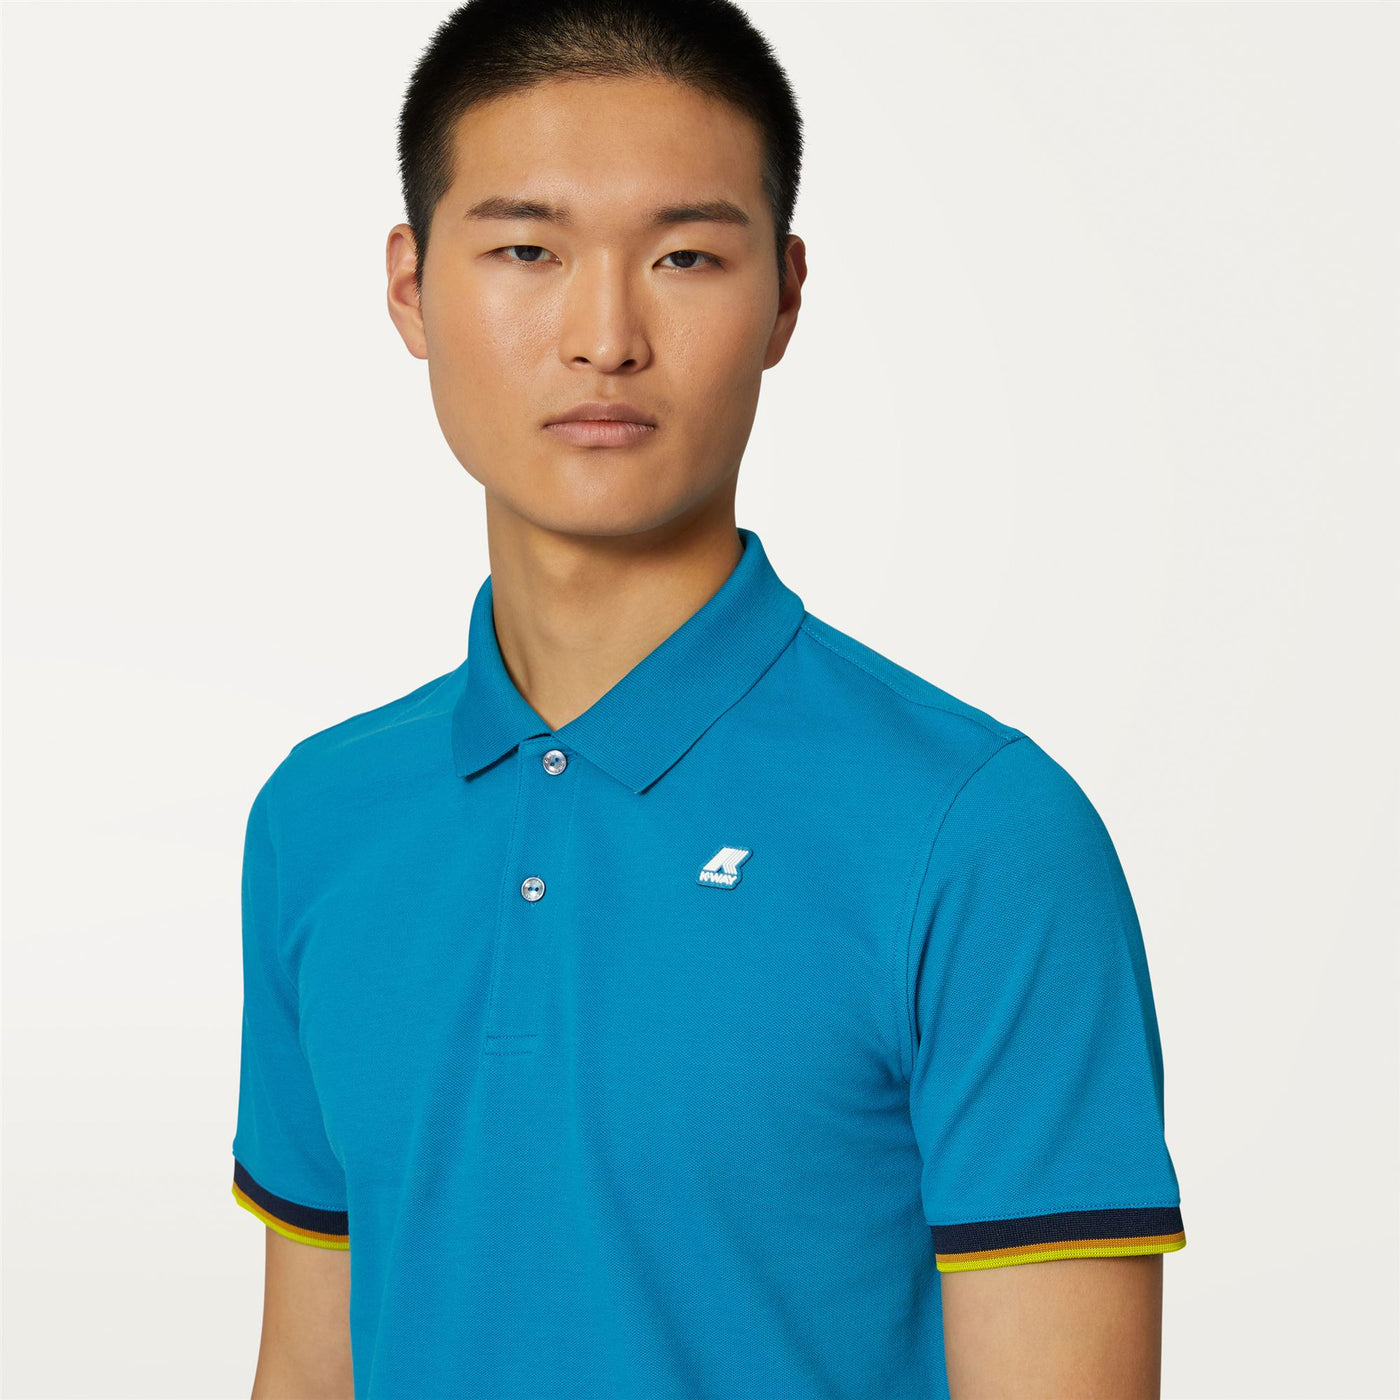 Polo Shirts Man VINCENT Polo TURQUOISE DK Detail Double				